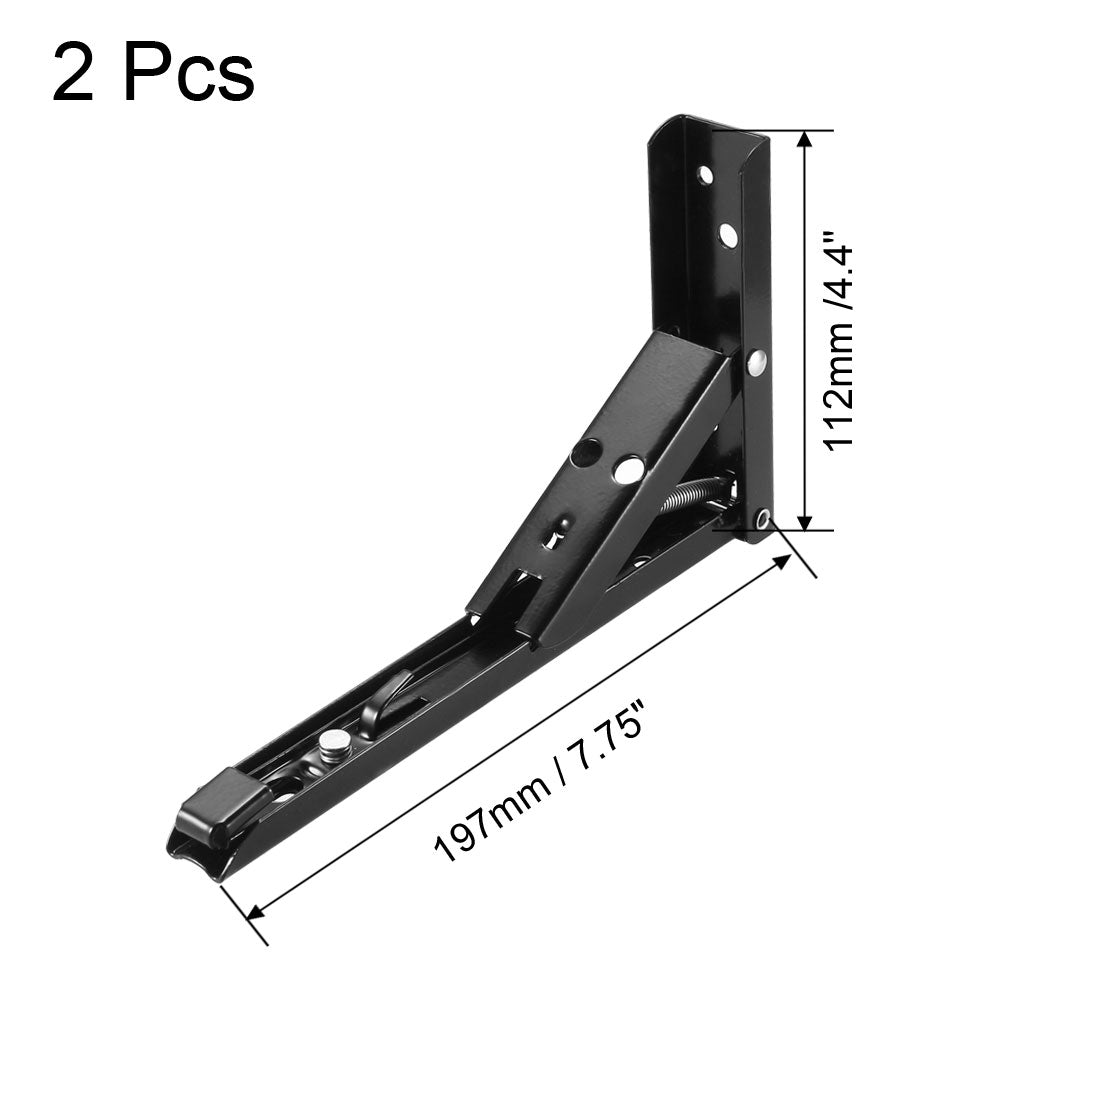 uxcell Uxcell Folding Bracket 8 inch 197mm for Shelves Table Desk Wall Mounted Support Collapsible Long Release Arm Space Saving Carbon Steel 2pcs